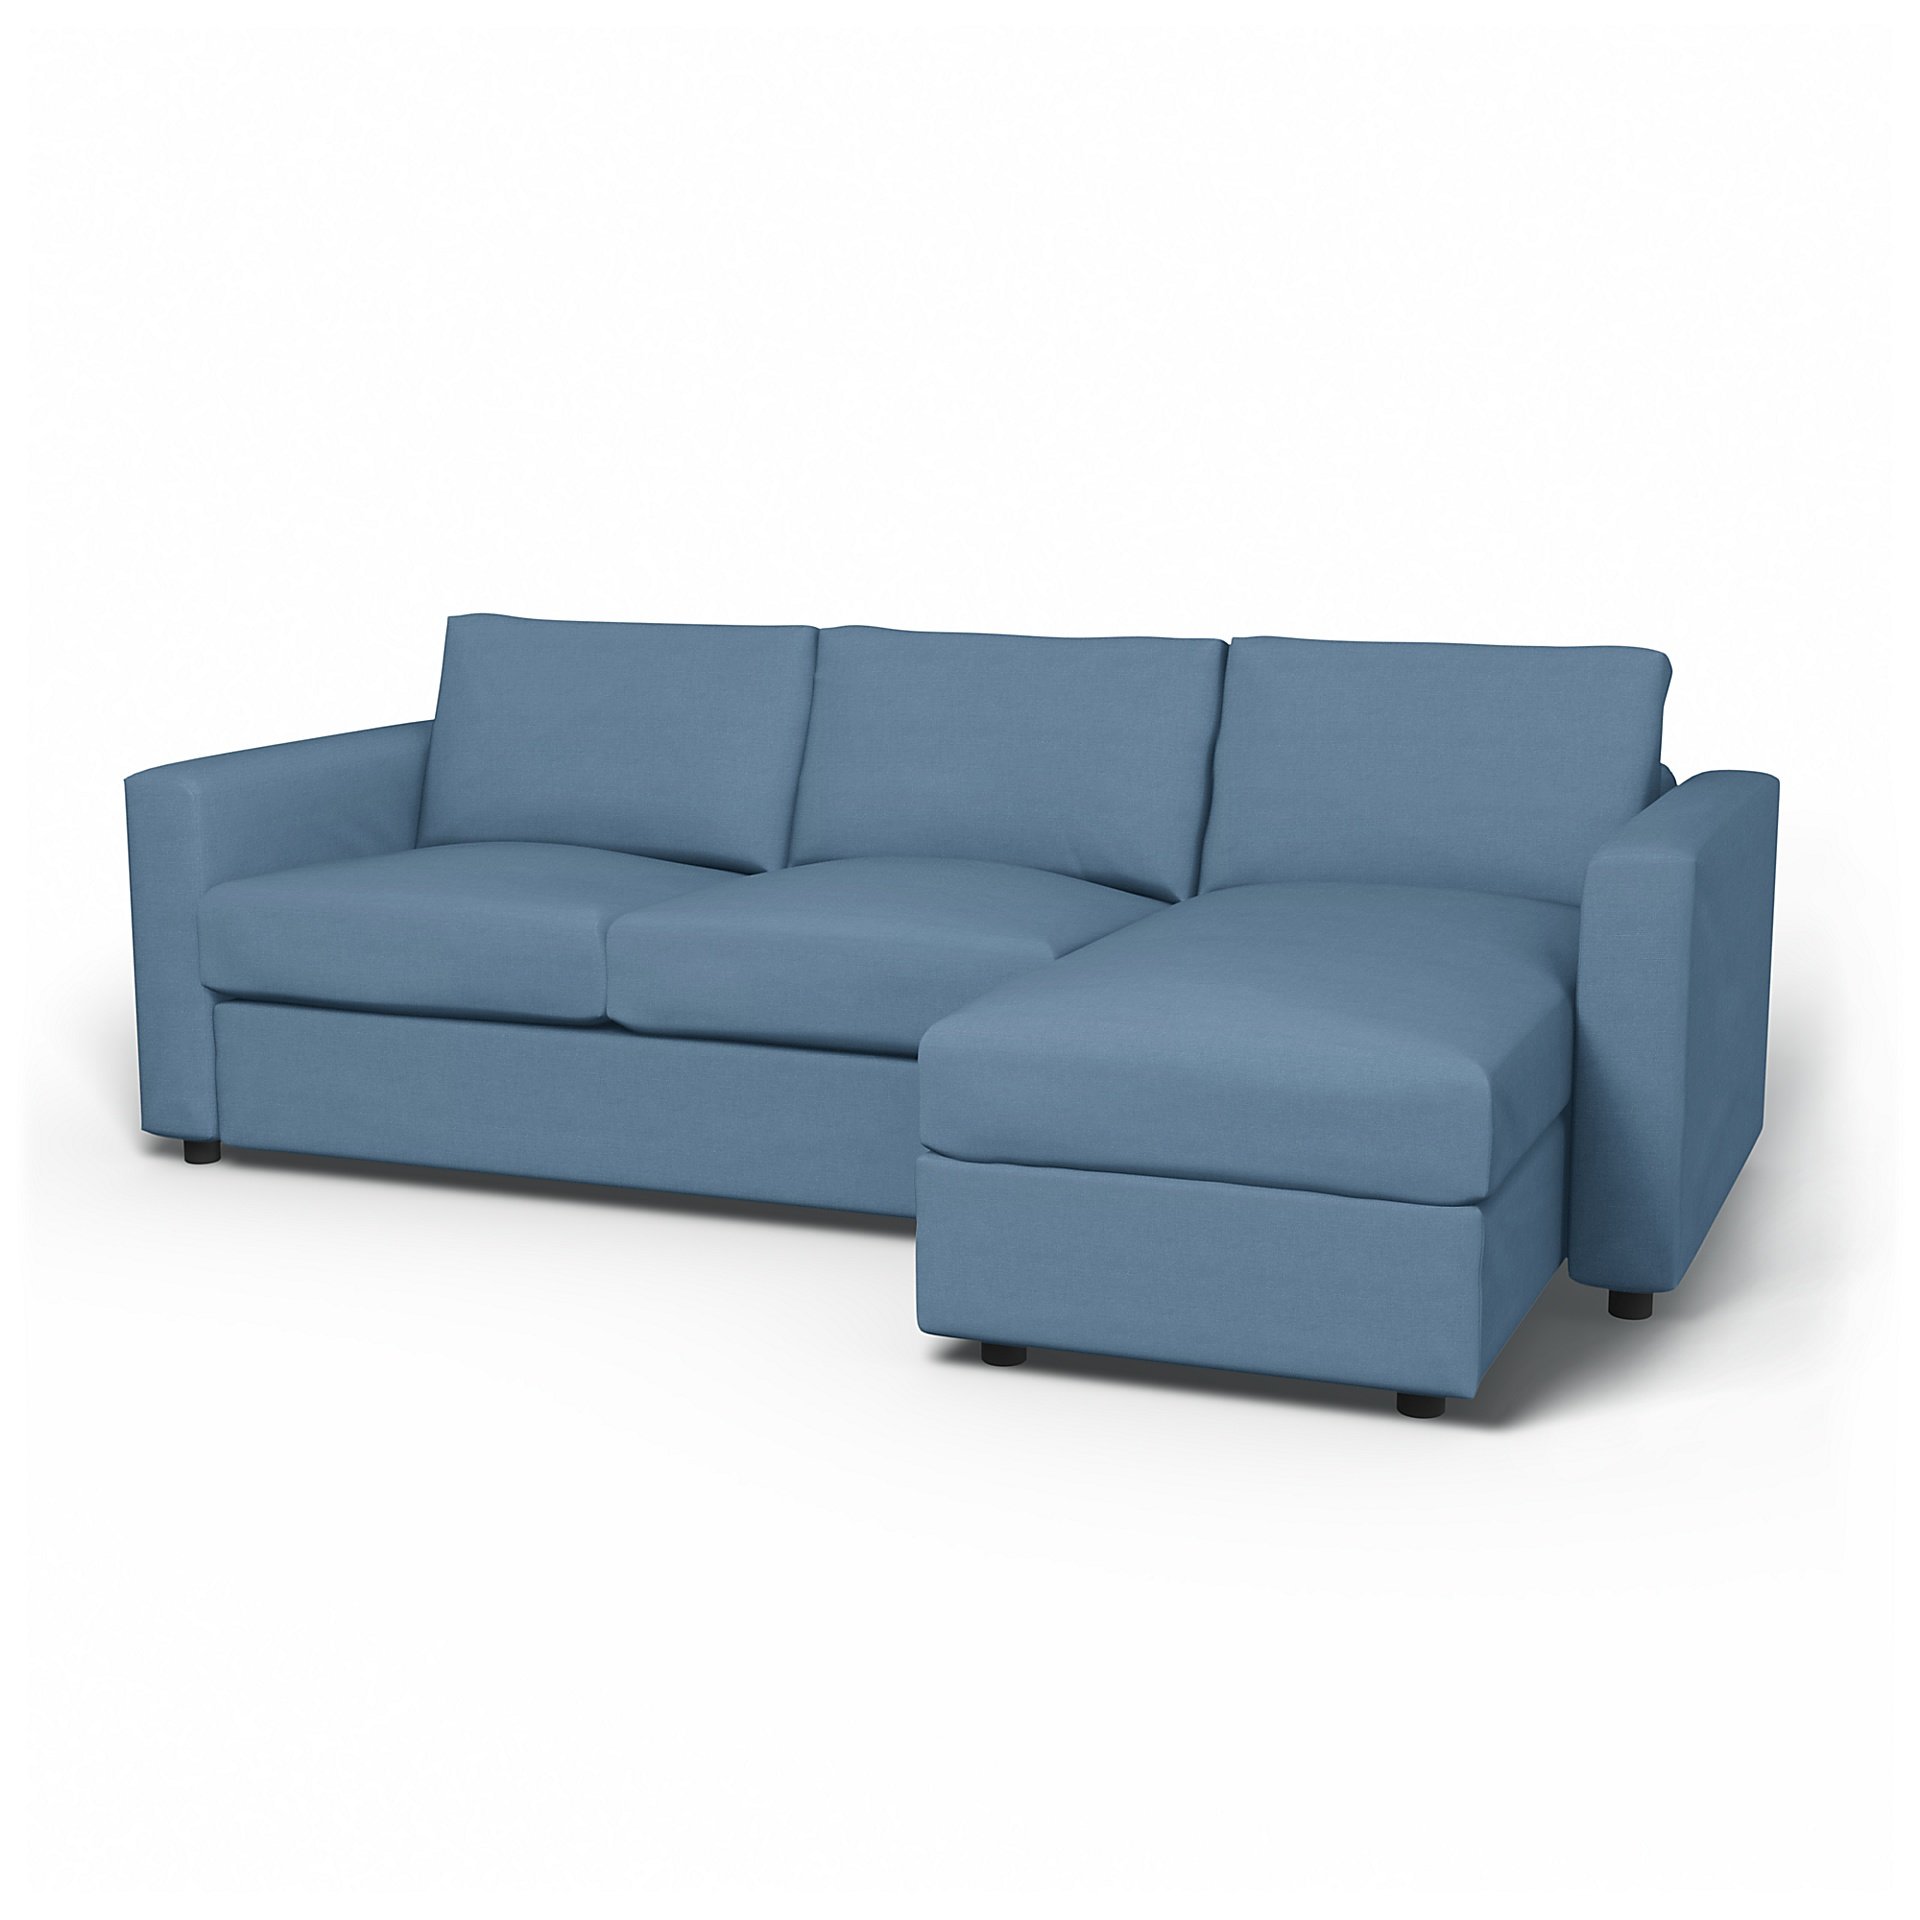 IKEA - Vimle 2 Seater Sofa with Chaise Cover, Vintage Blue, Linen - Bemz